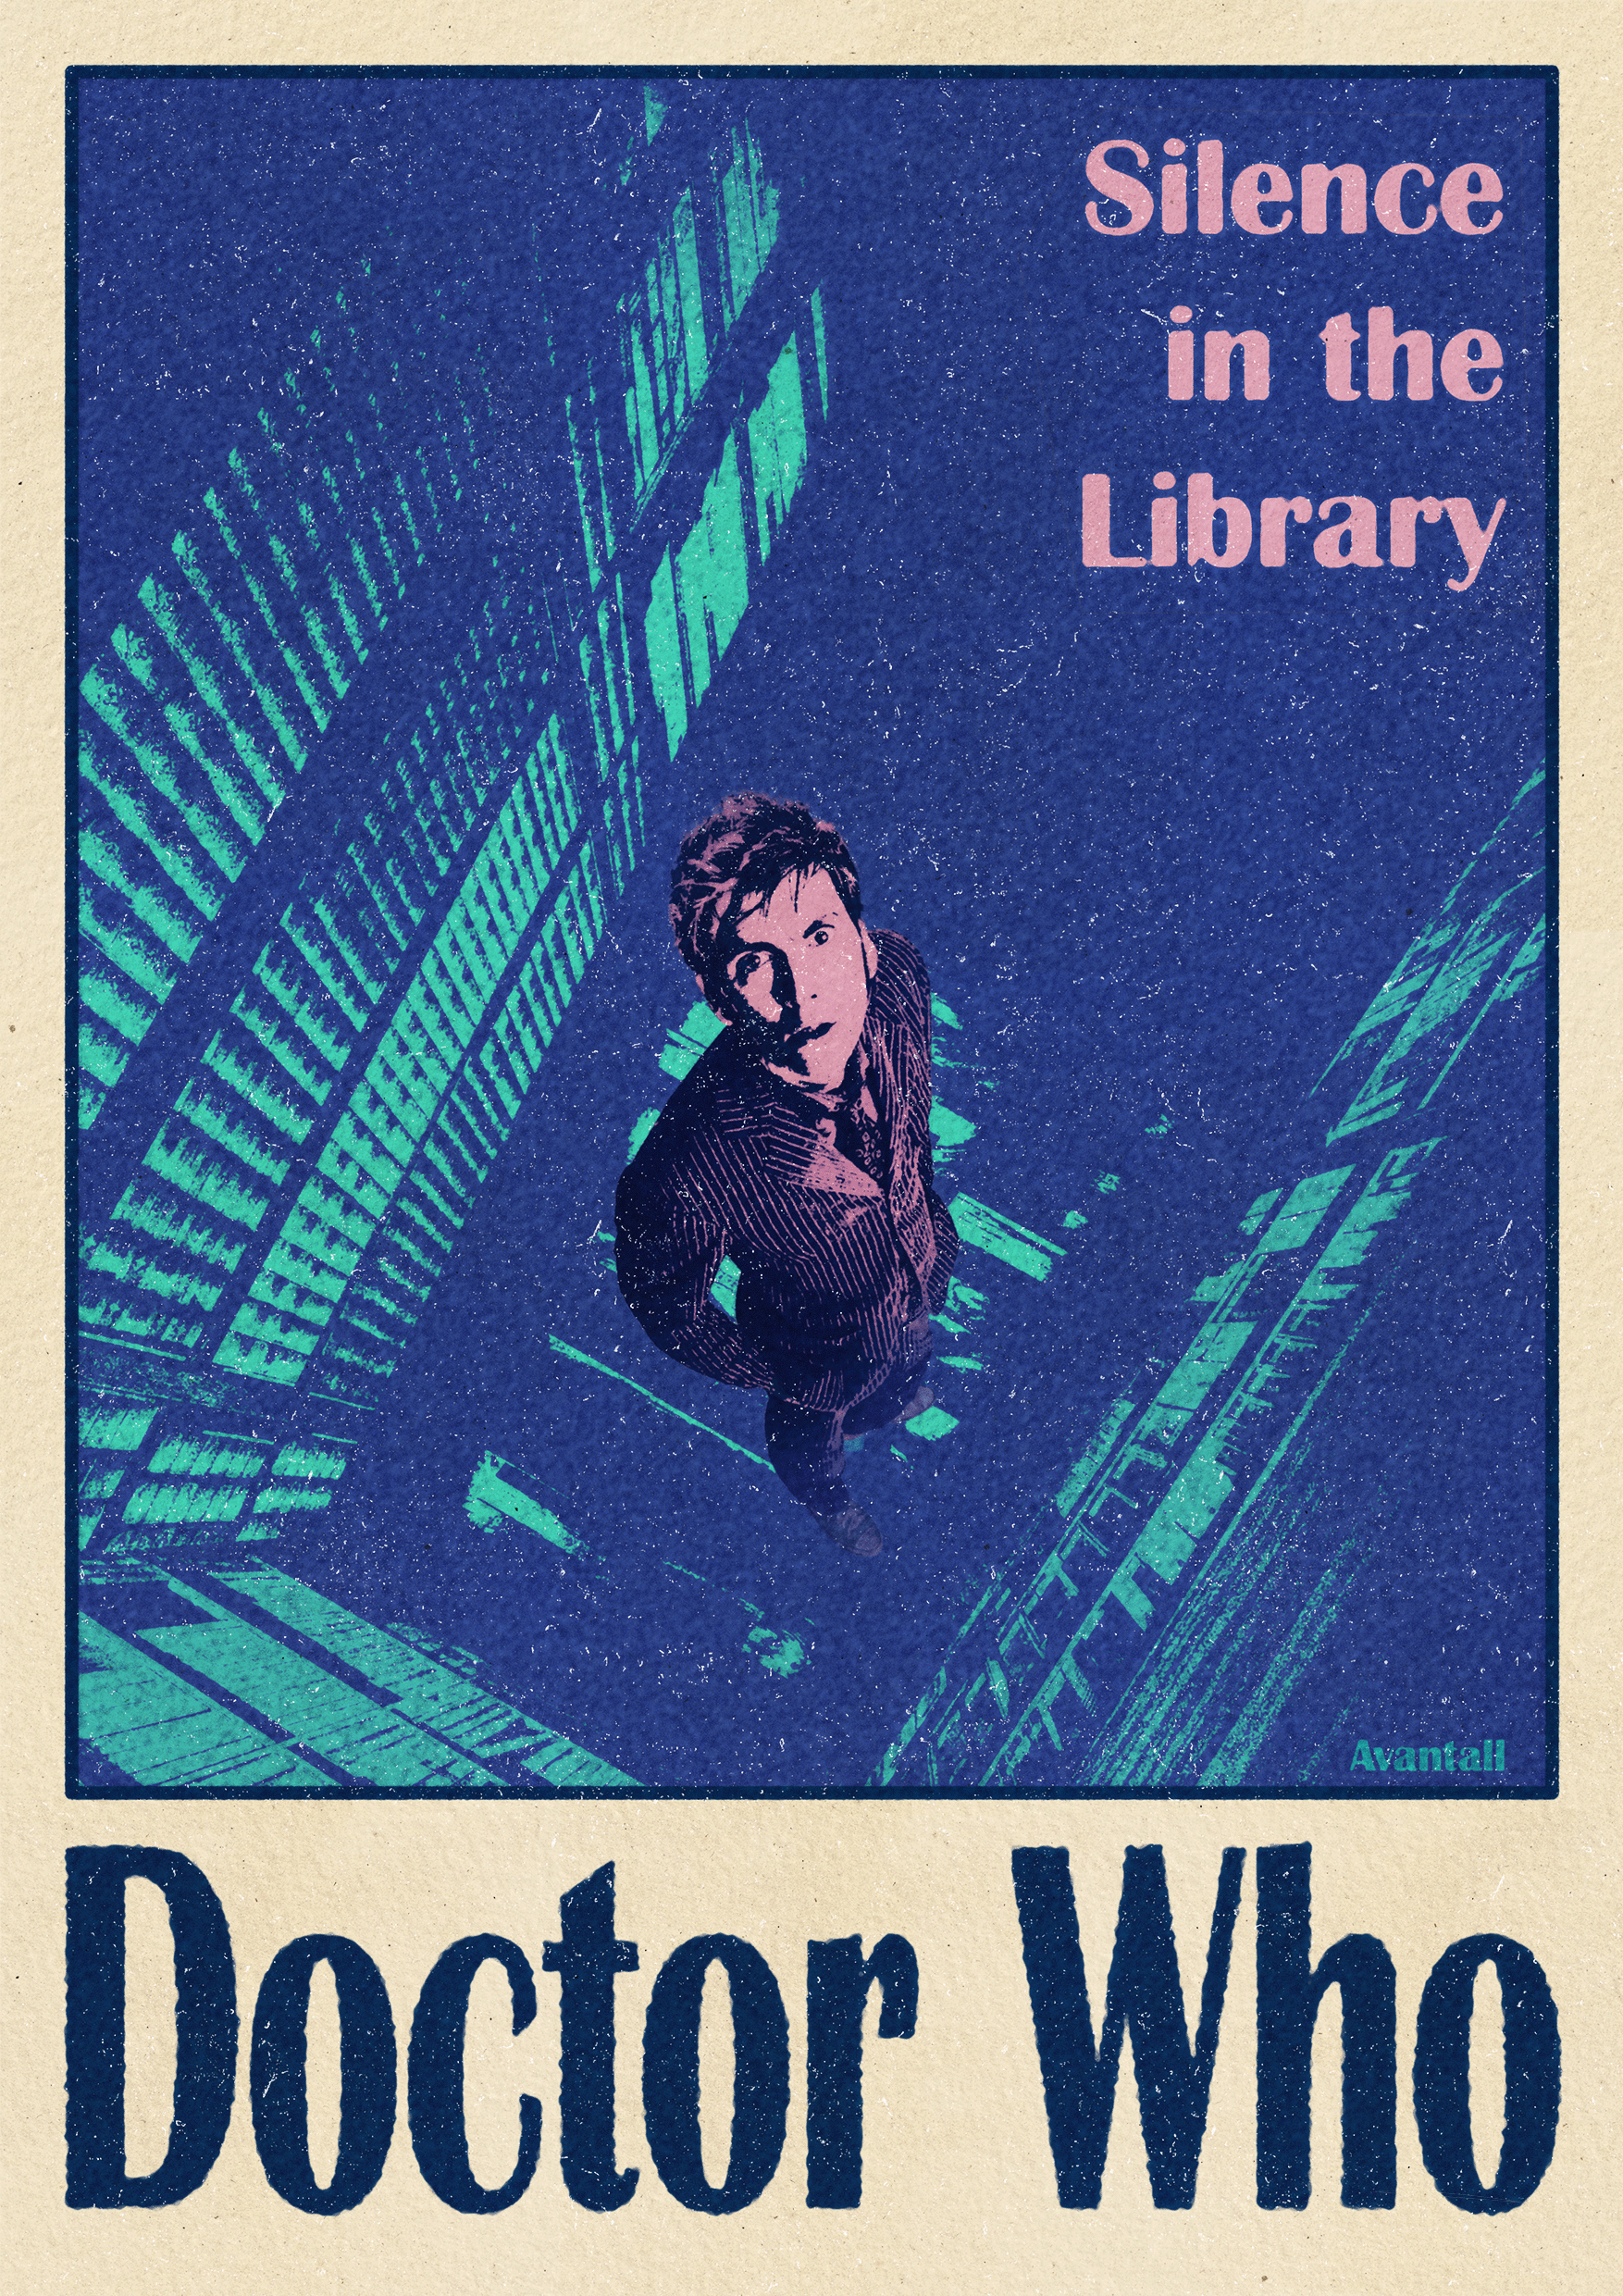 Doctor Who – Silence in the Library